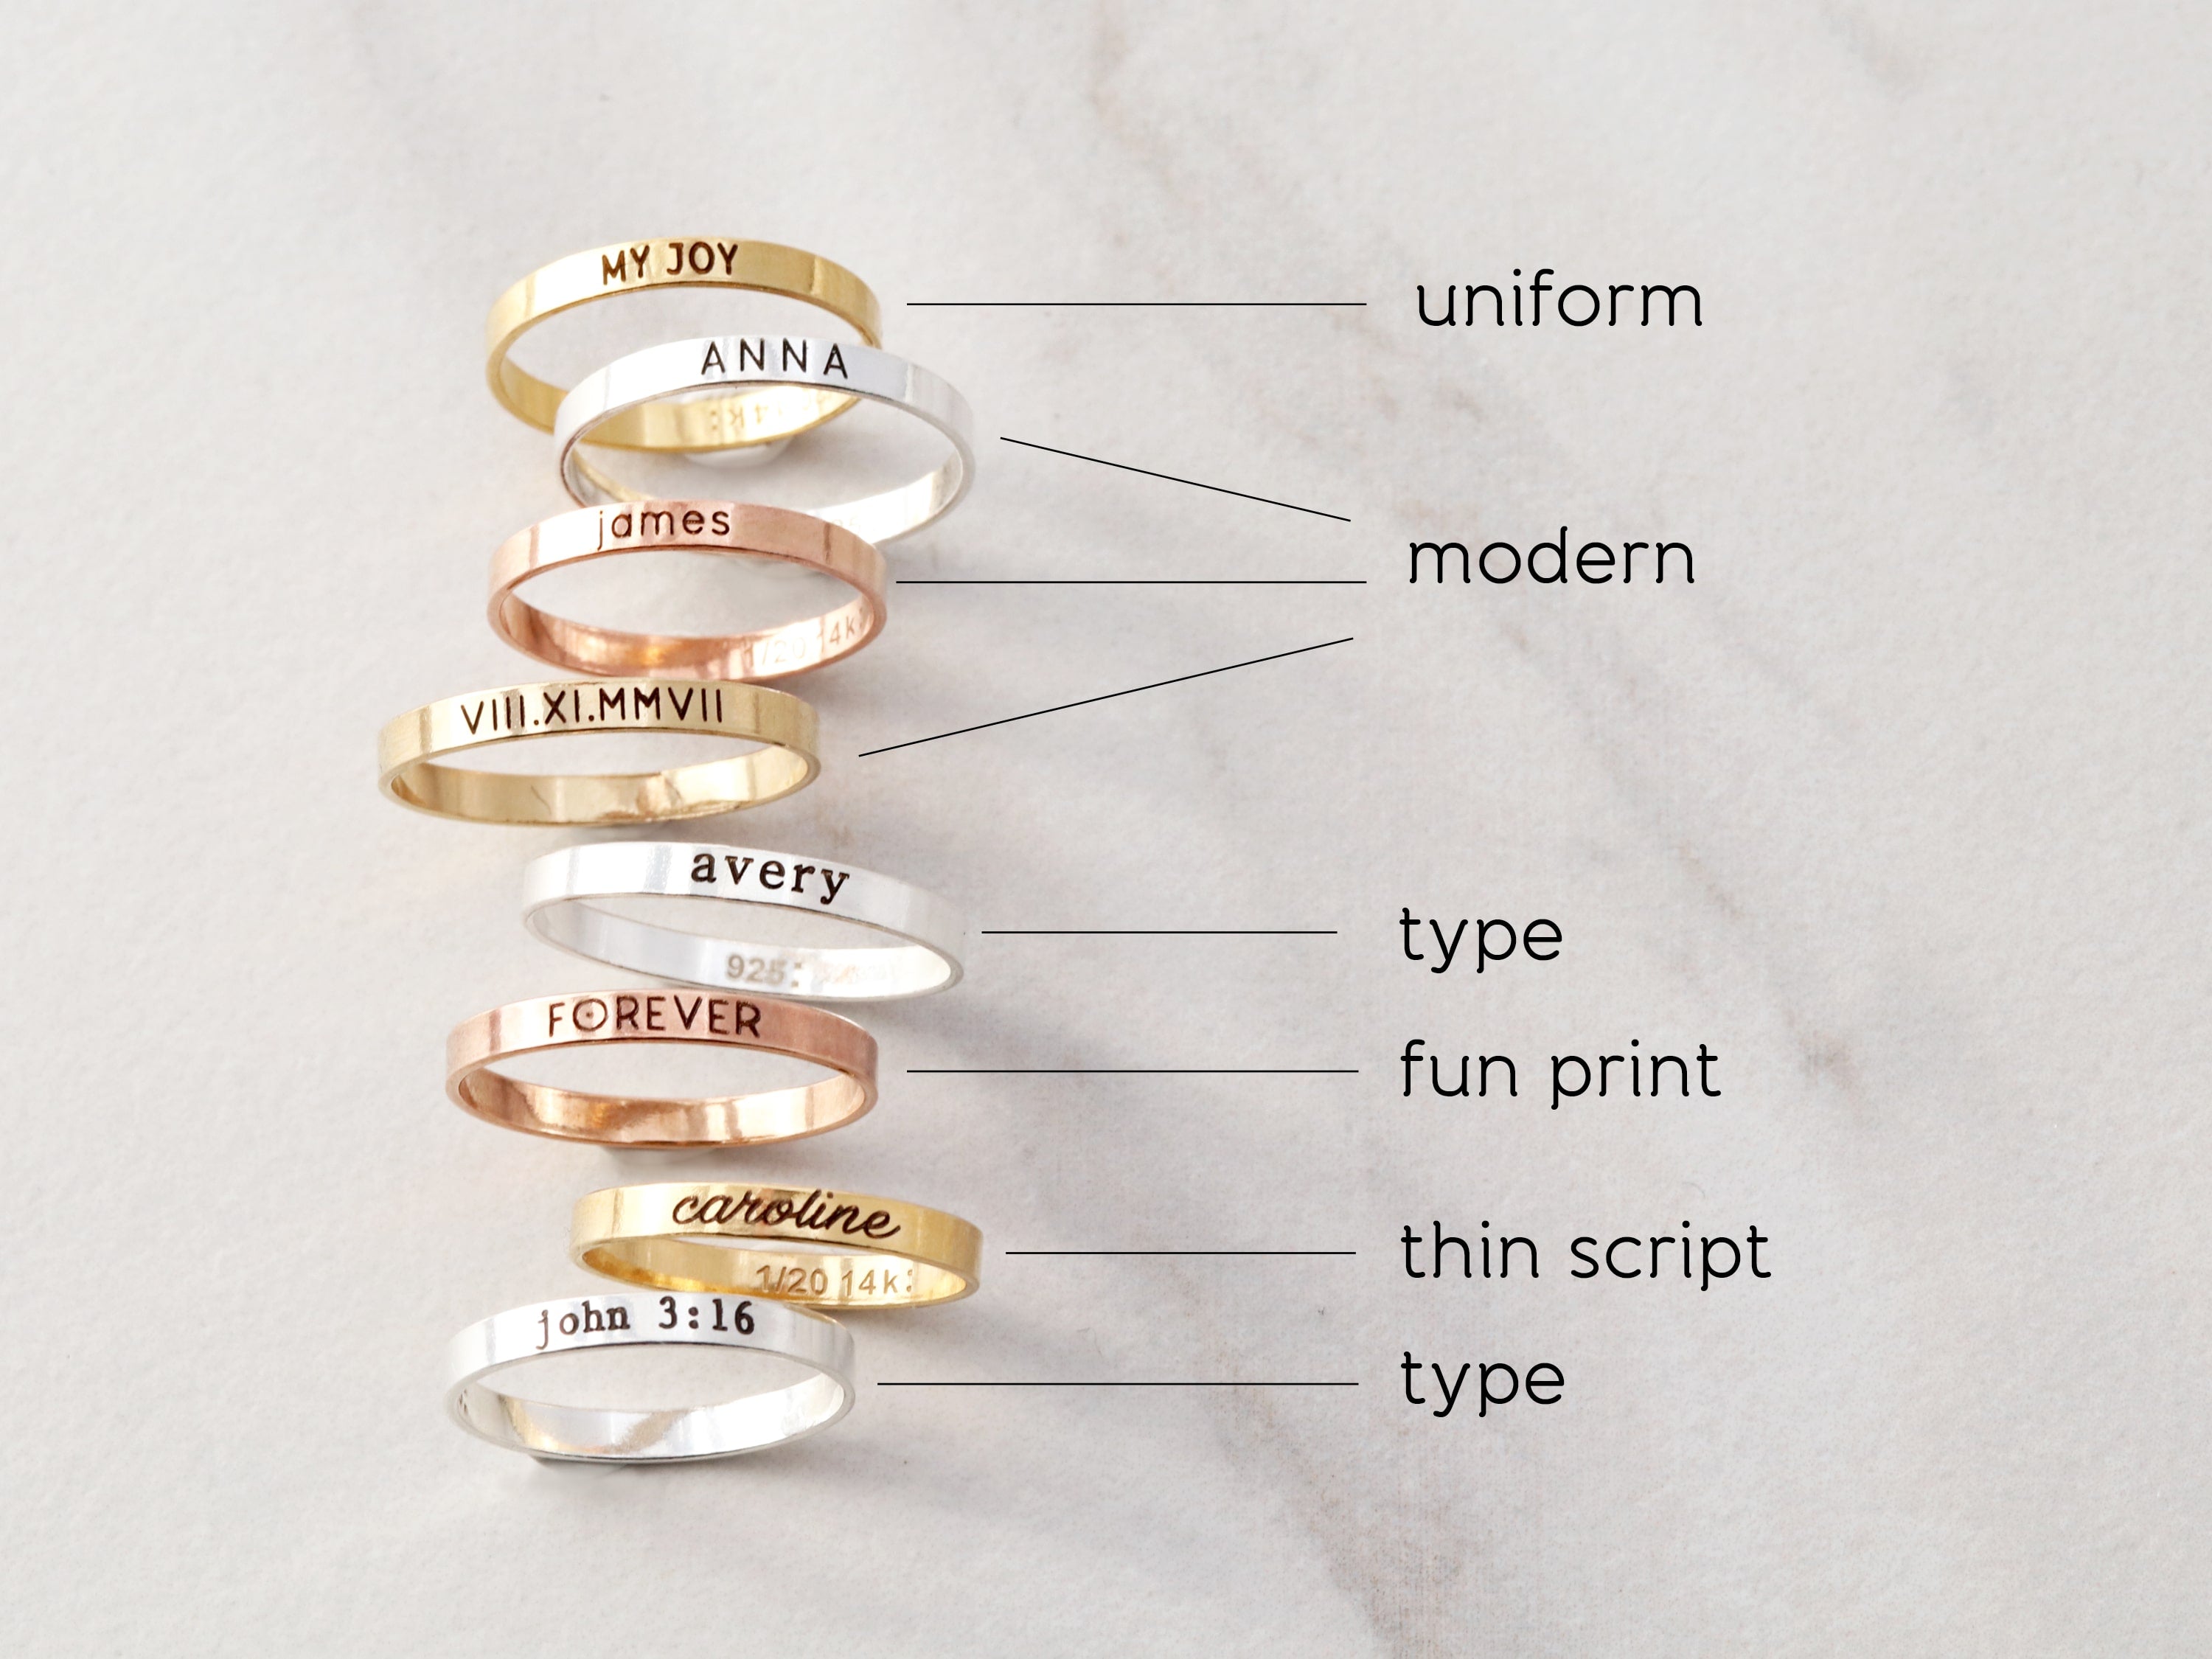 Simple Band Gold Ring For Men